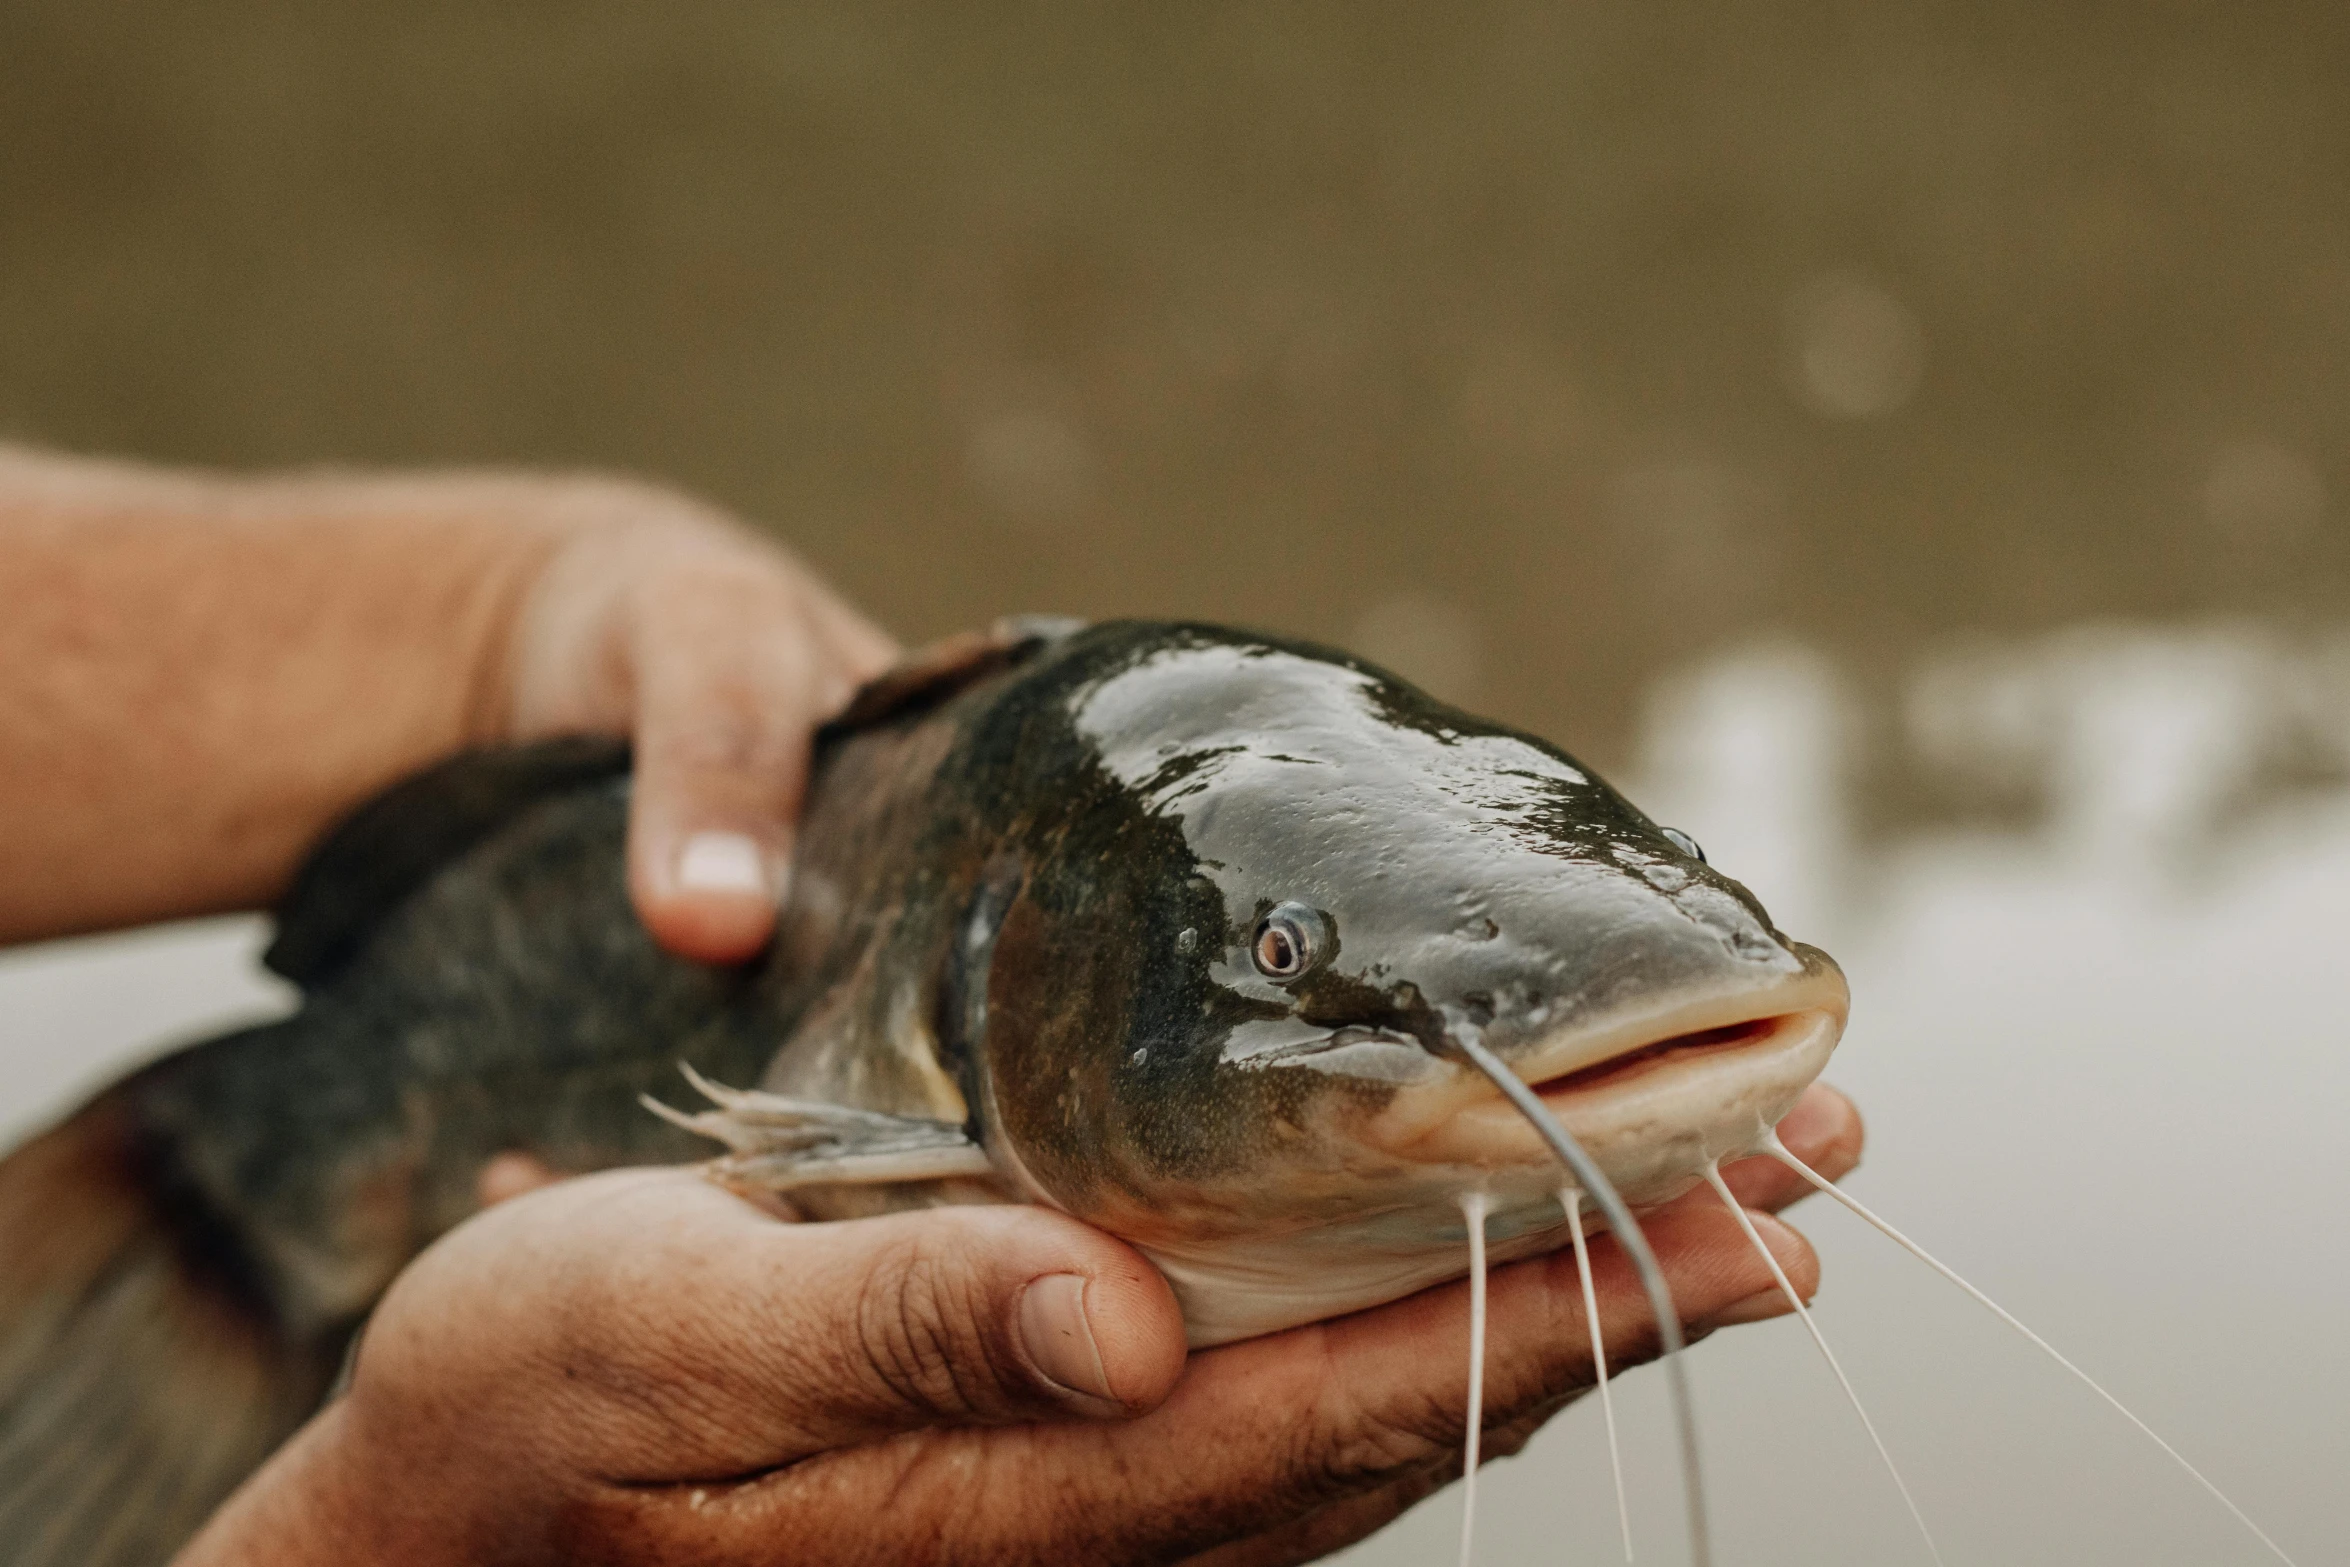 a person holds a fish on a surface